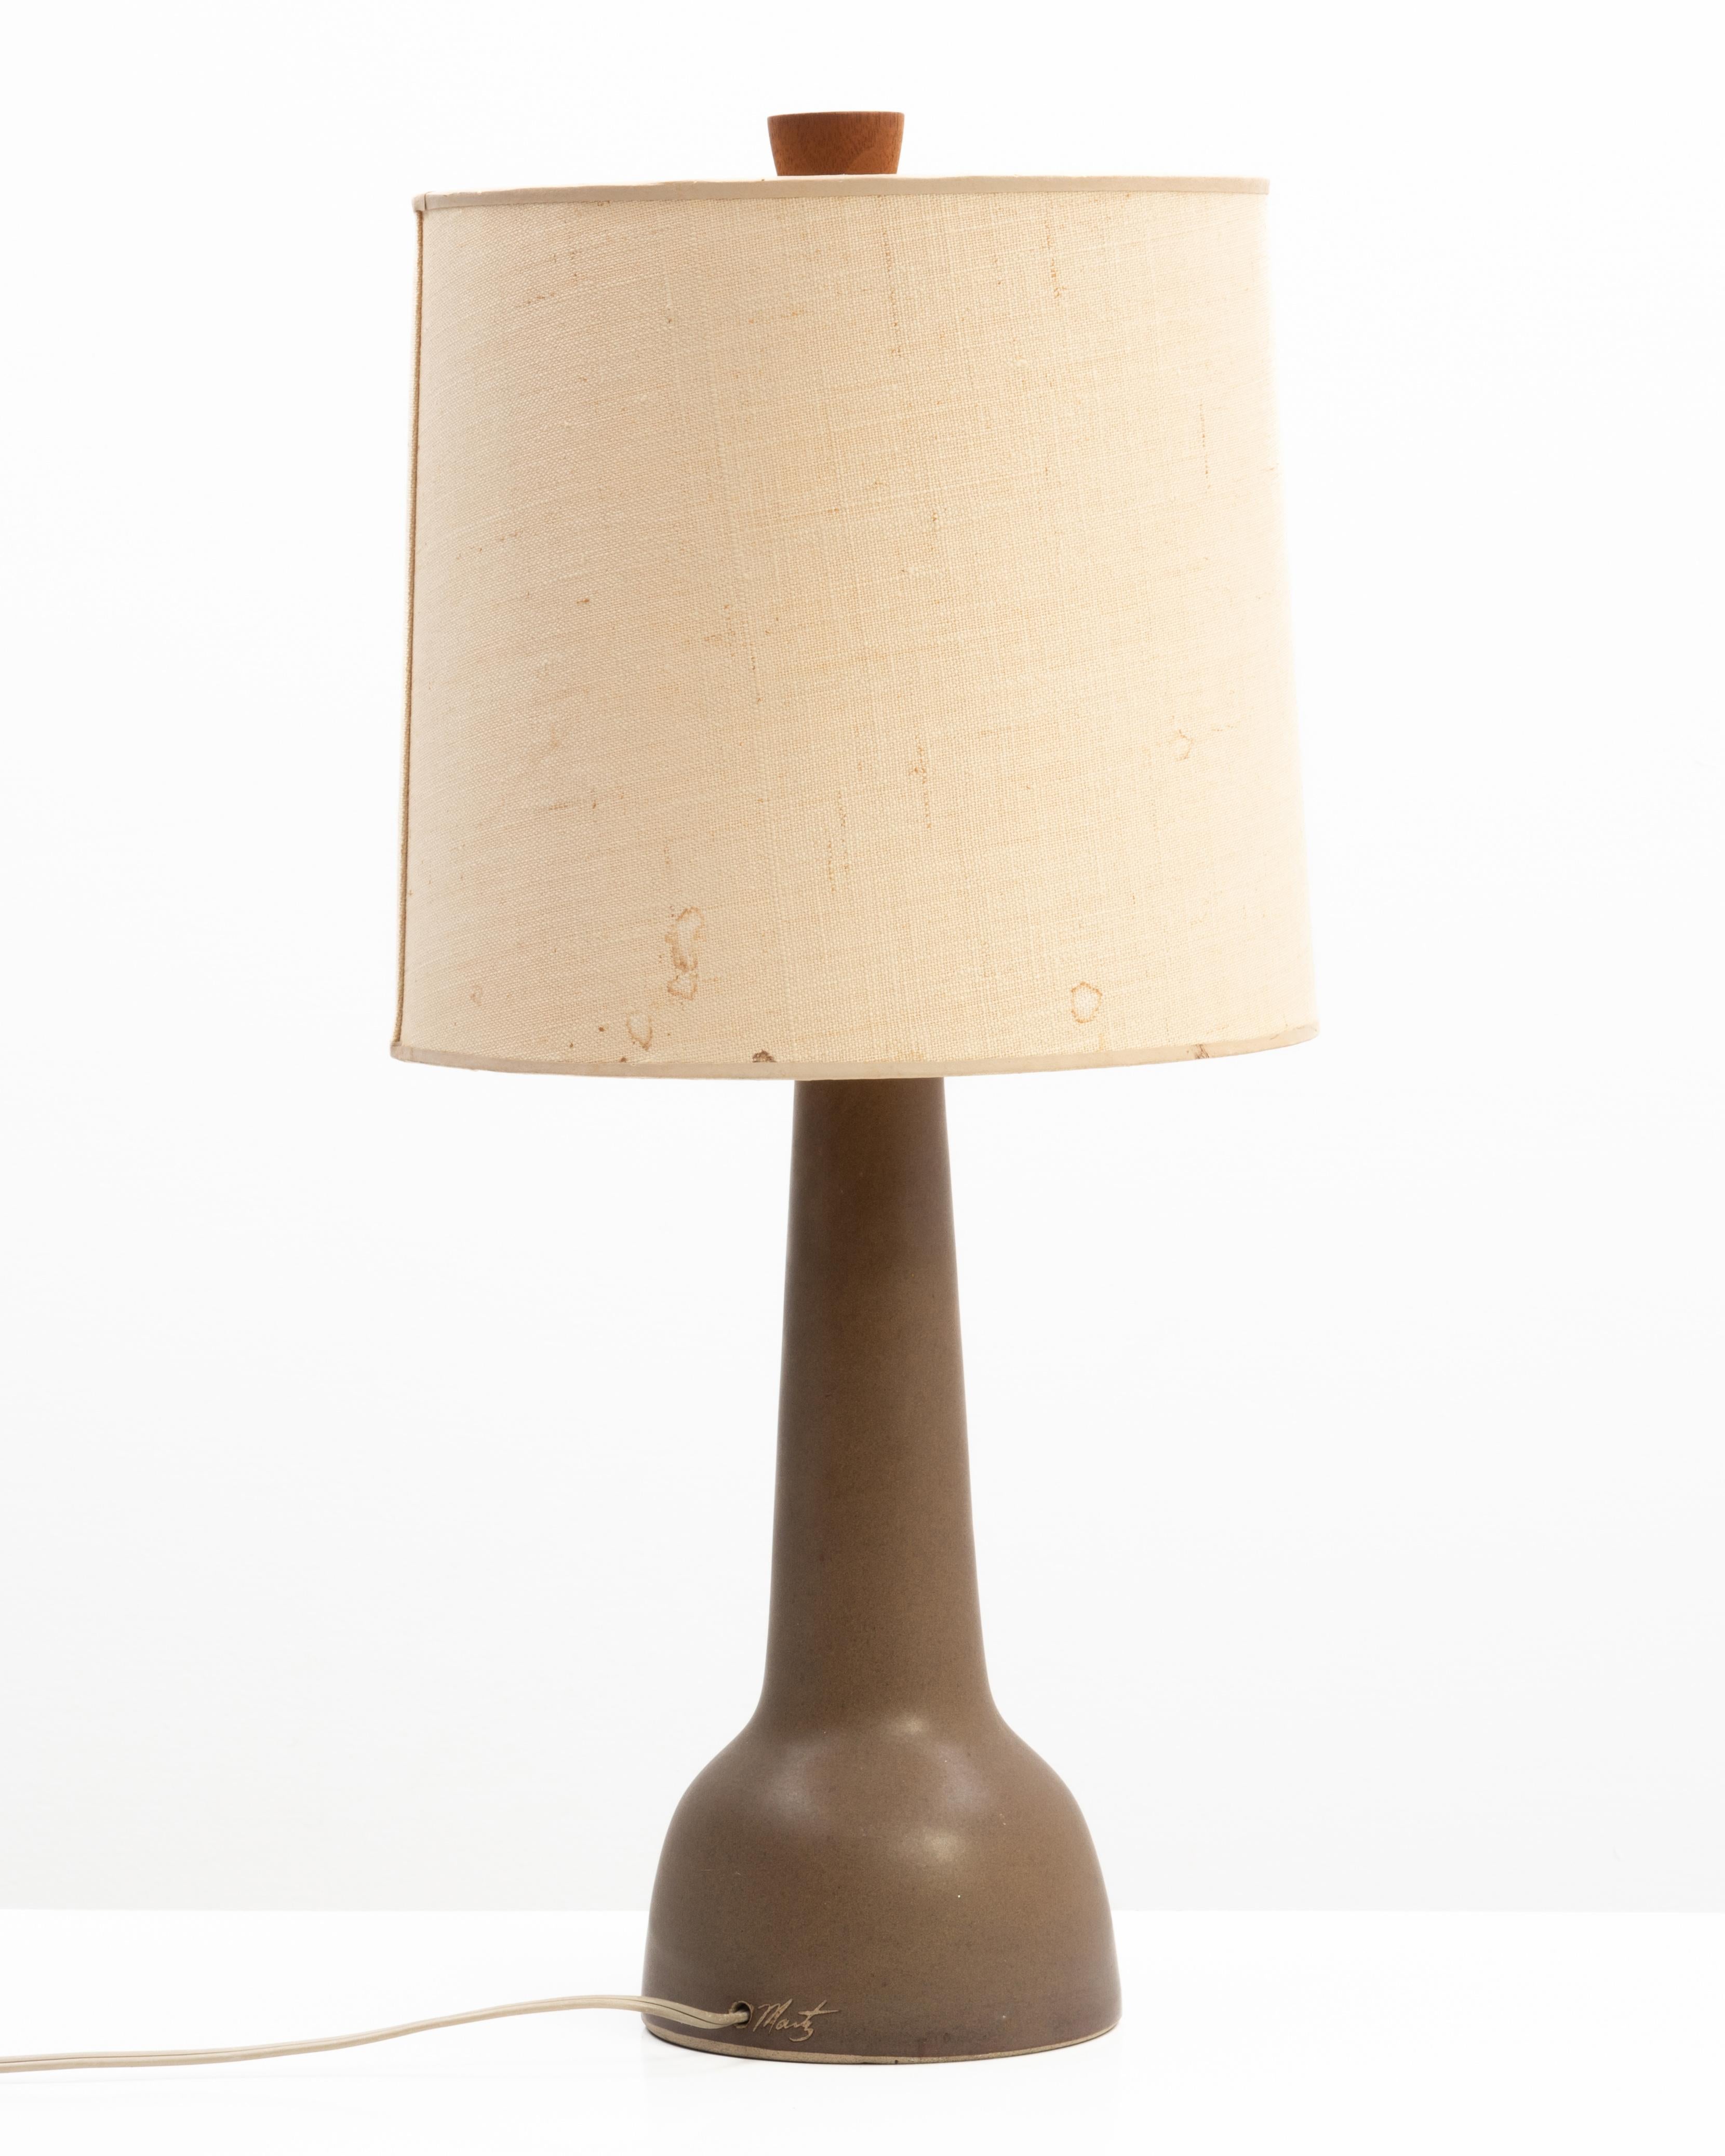 Gordon Jane Martz Marshall Studios Table Lamp Brown Speckled Original Finial In Good Condition For Sale In Forest Grove, PA